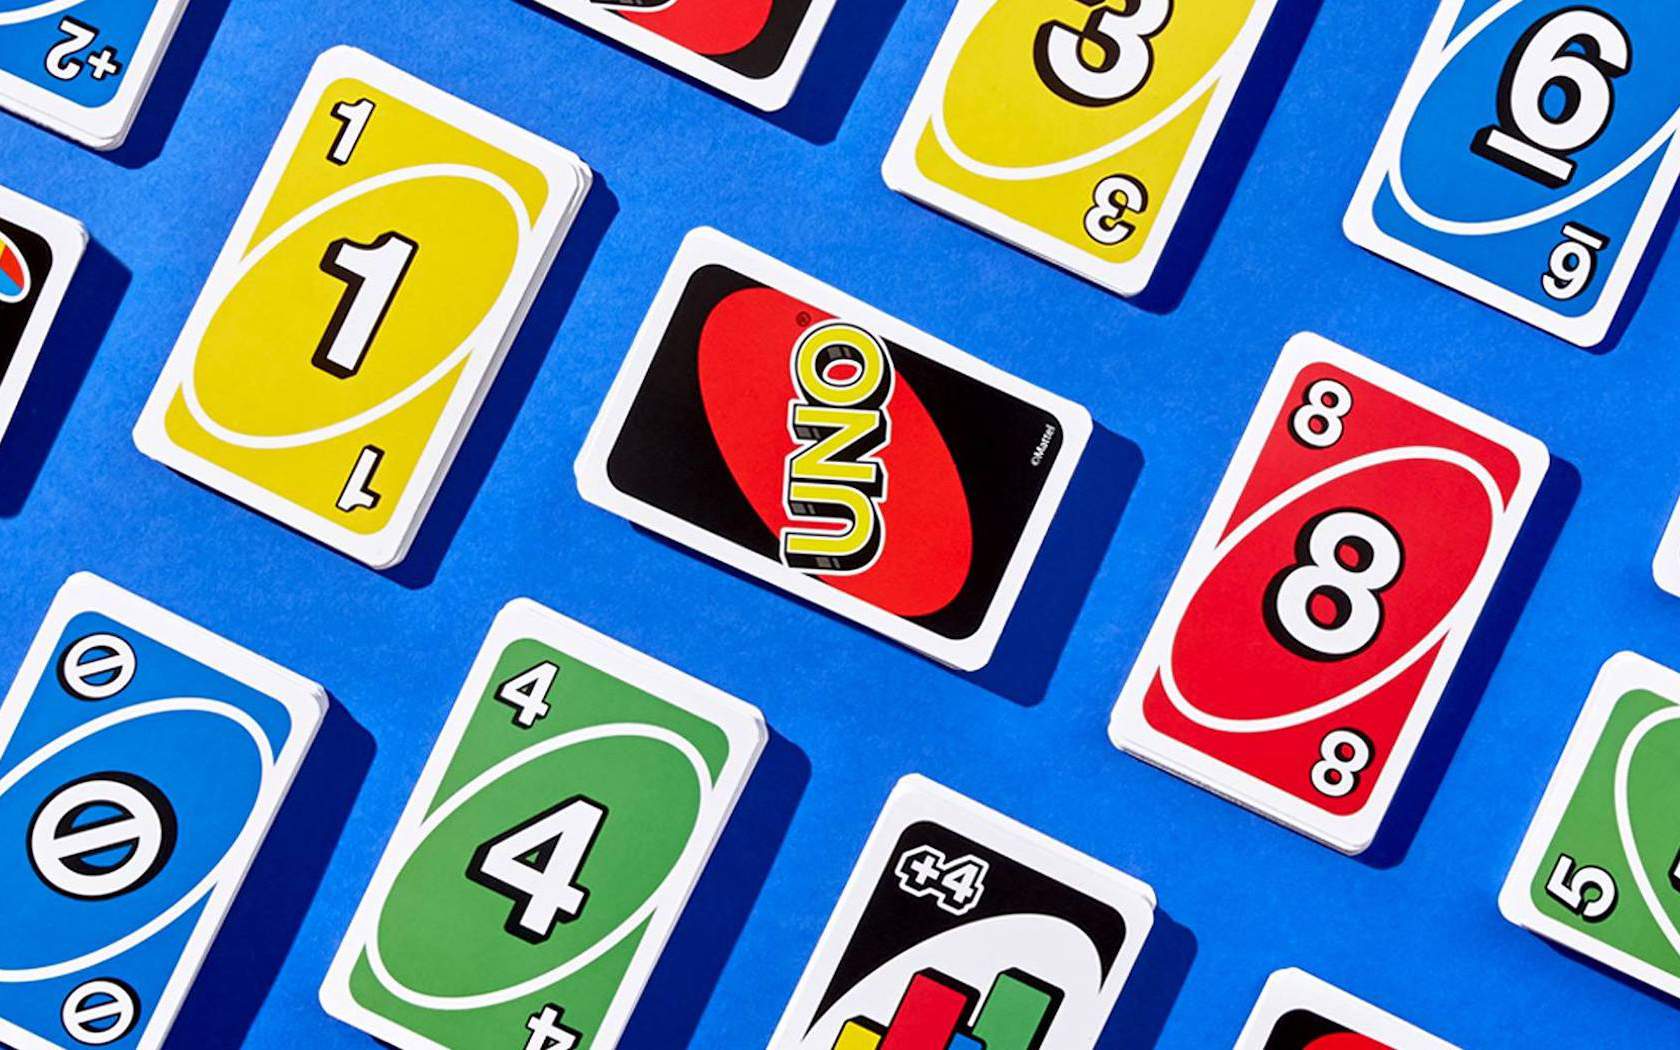 There's an UNO competition on at The Social Club in Richmond, Melbourne